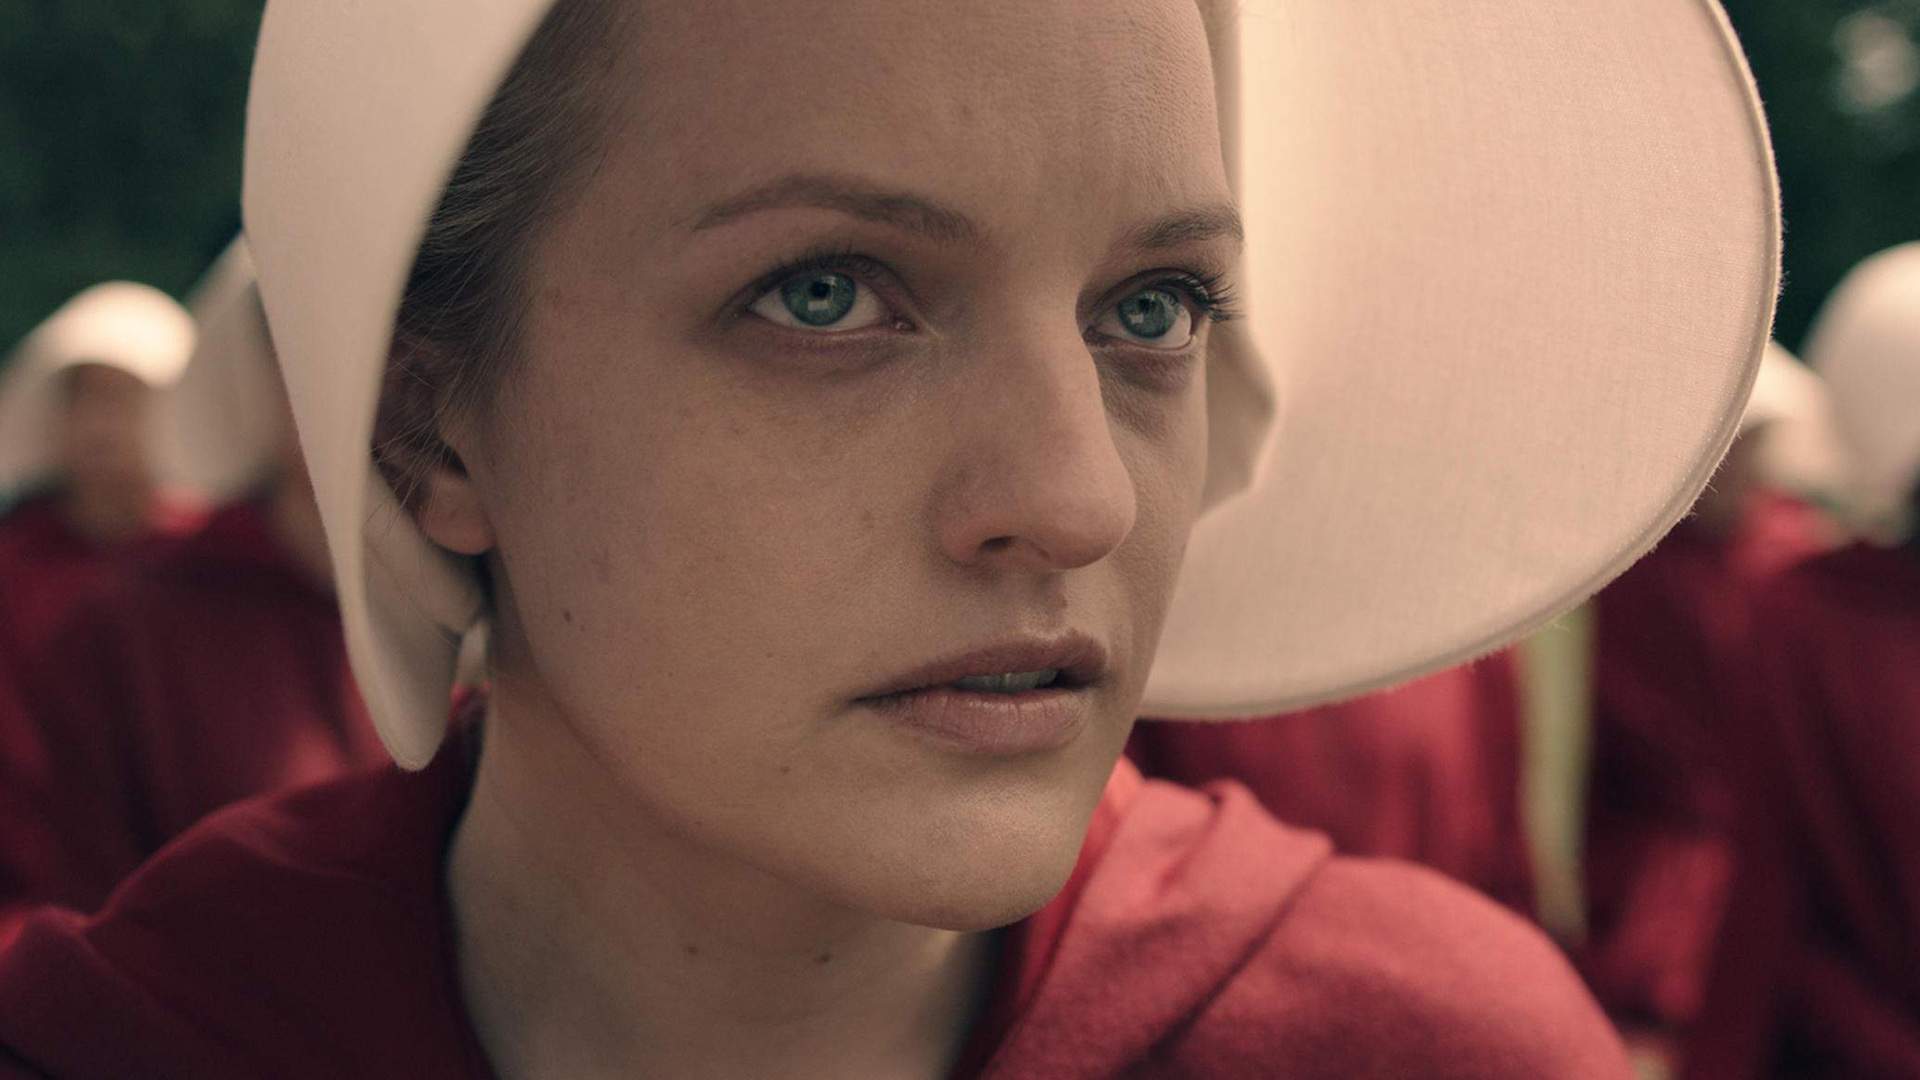 Large Groups are Freaking Out SXSW Attendees to Promote 'The Handmaid's Tale'